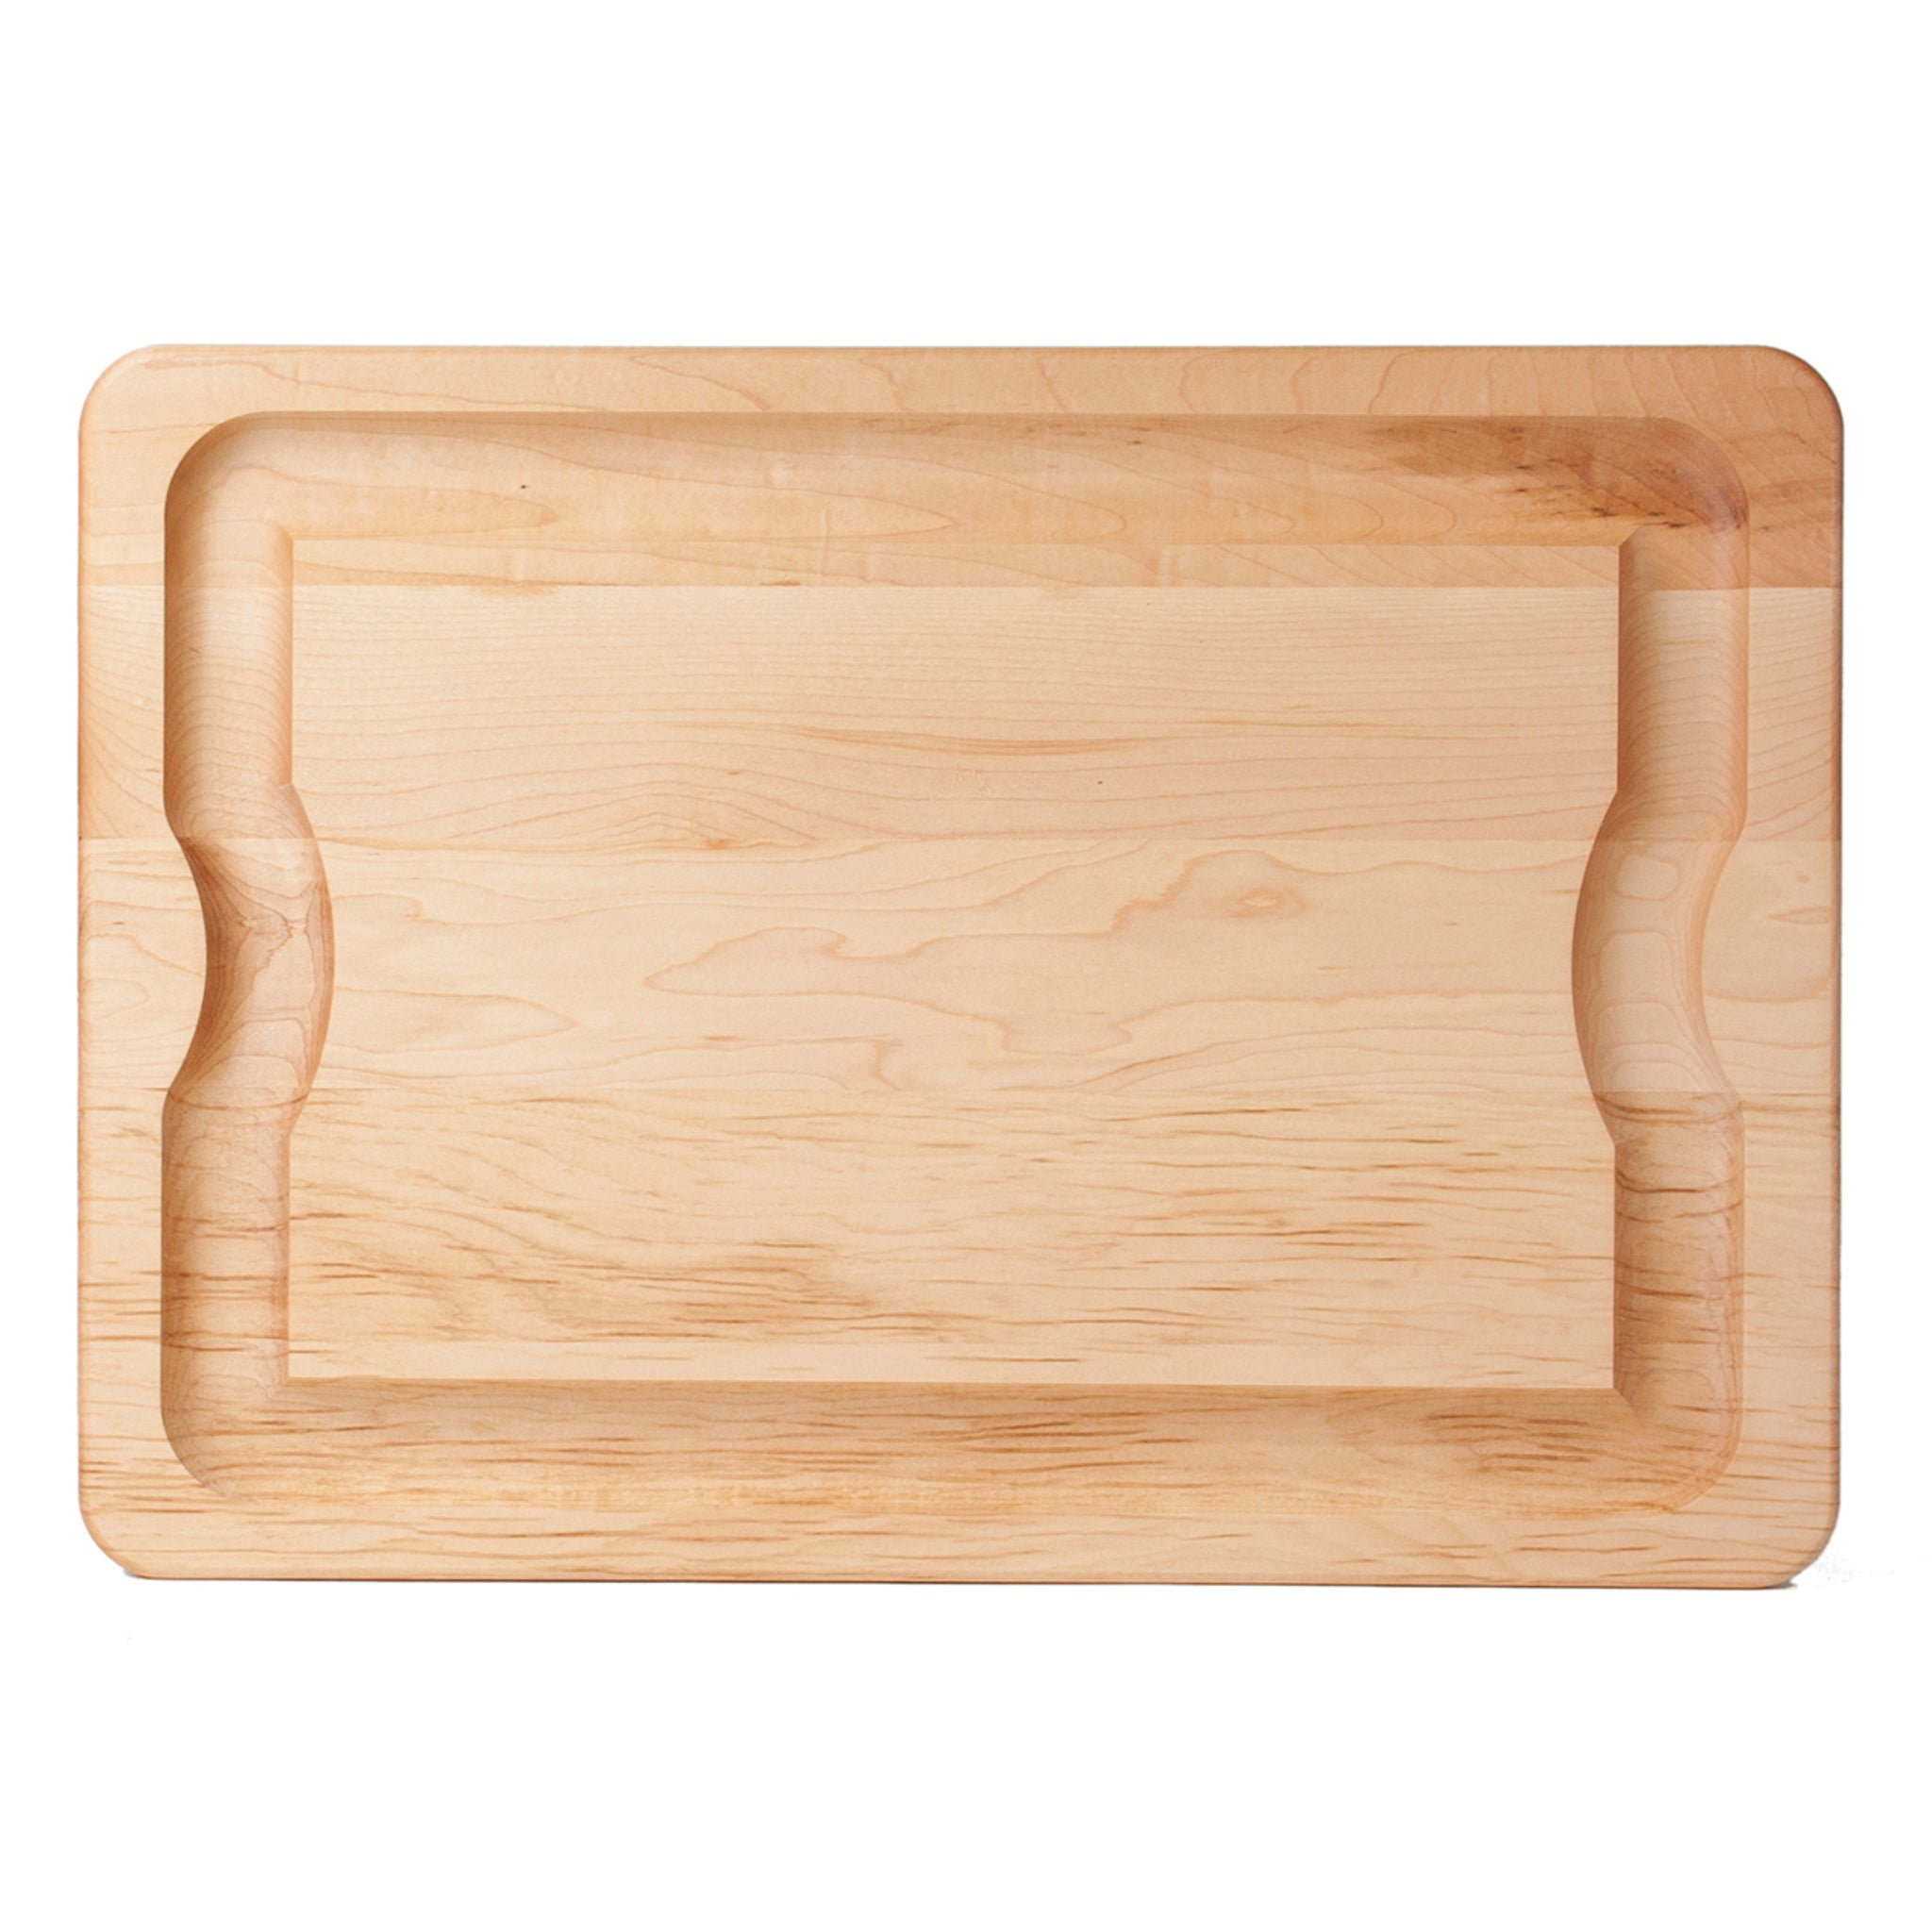 Maple Deluxe Barbecue Cutting Board 2-1/4 Thick (RA-Board Series)